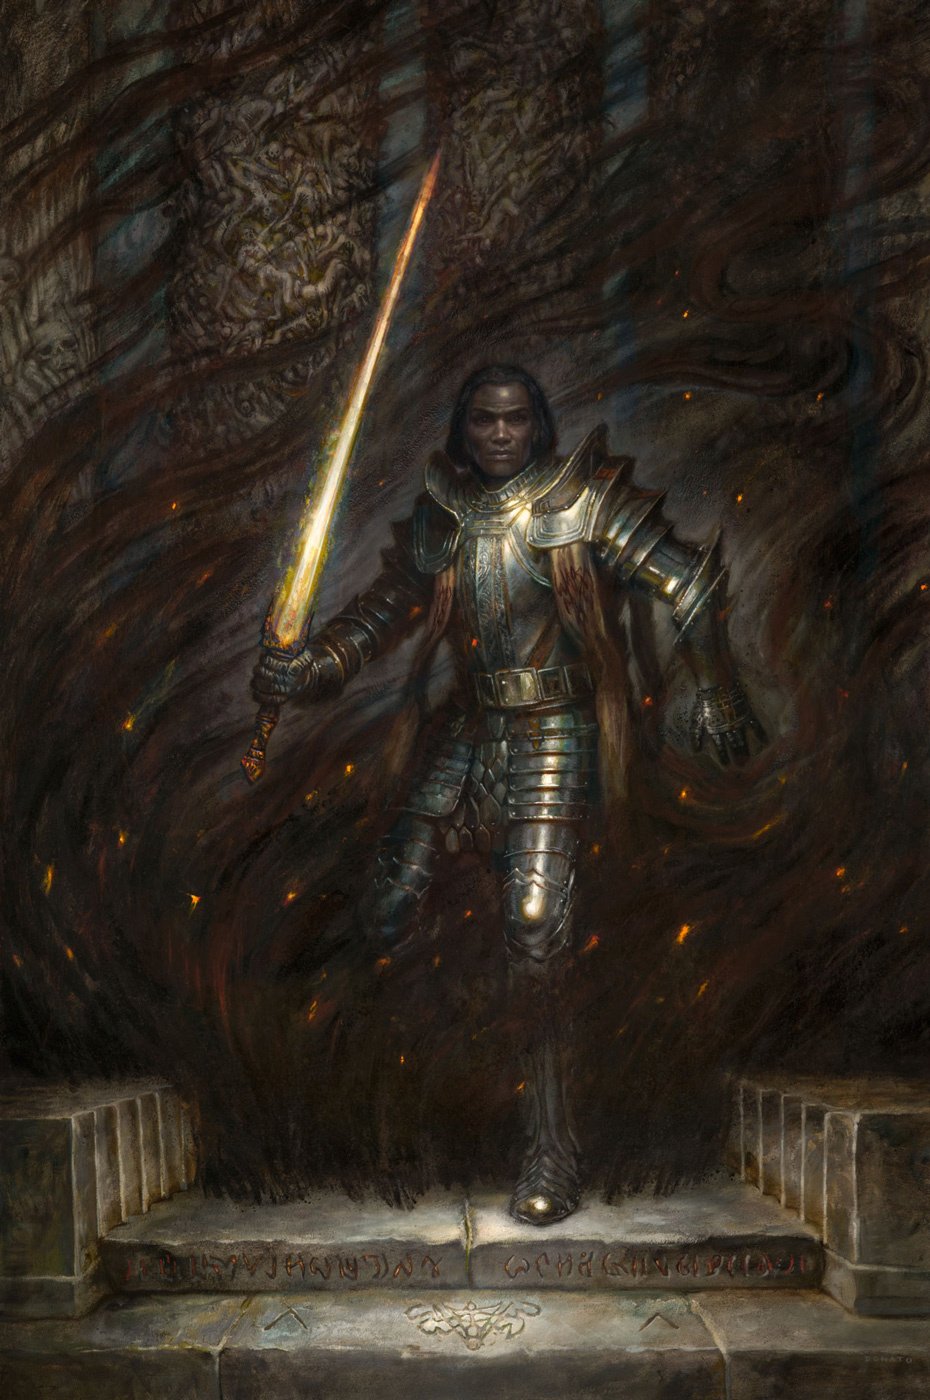 The Herald Taln
from Brandon Sanderson's Stormlight Archives
36" x 24"  oil on Panel 2019
Collection of Brandon Sanderson
prints available in the store